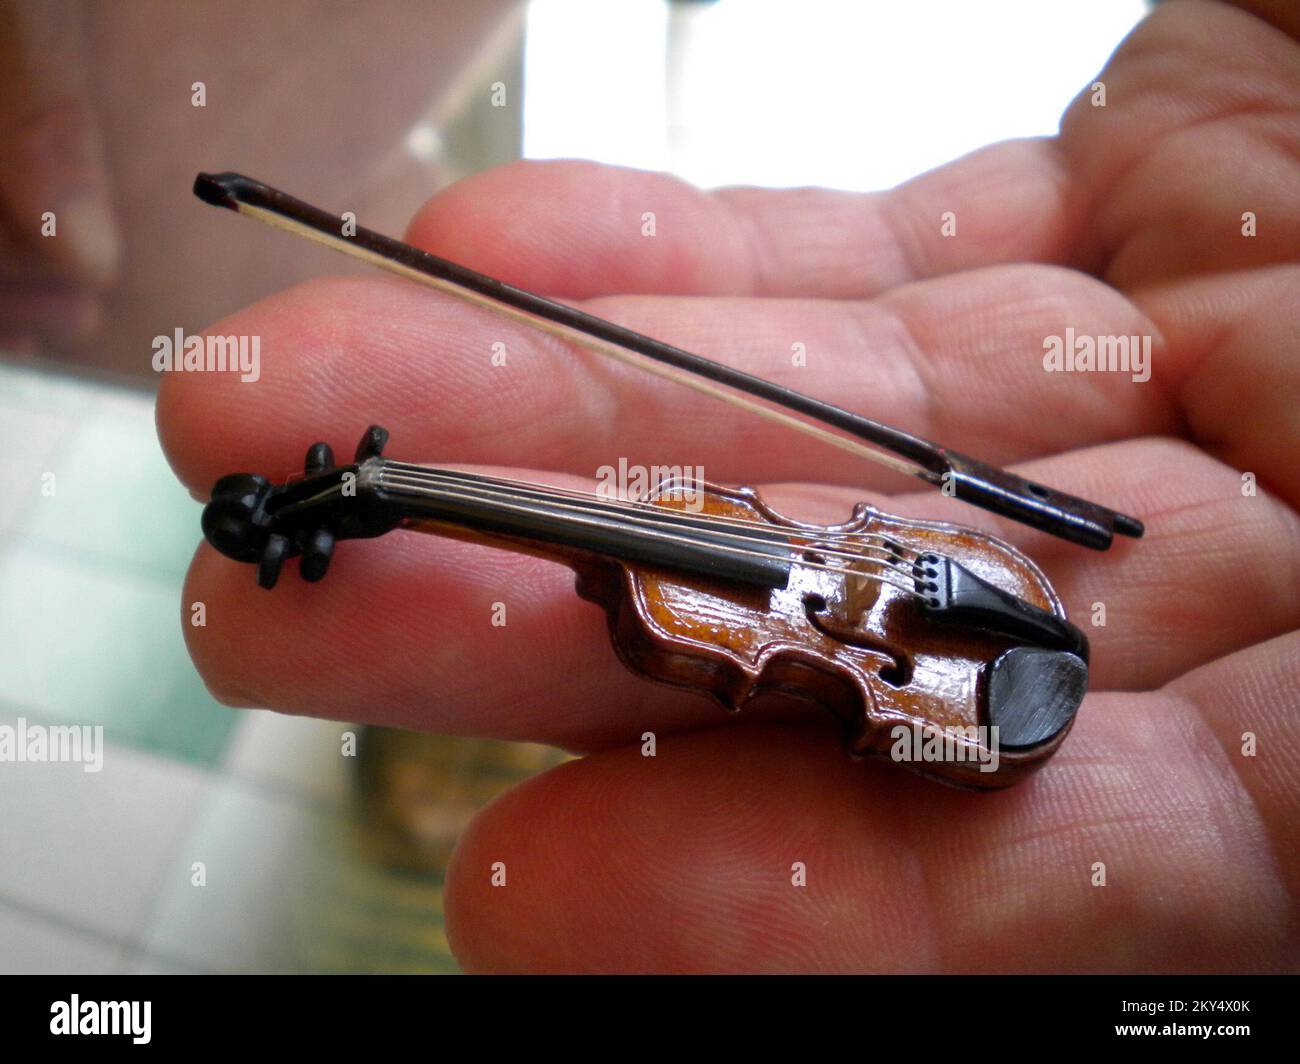 Inventor Vladimir Kulic from Borovo has made the smallest violin in the  world. To create the violin he used cikakatimber from Bali and string made  from Indian horsehair from Bolivia. Its length